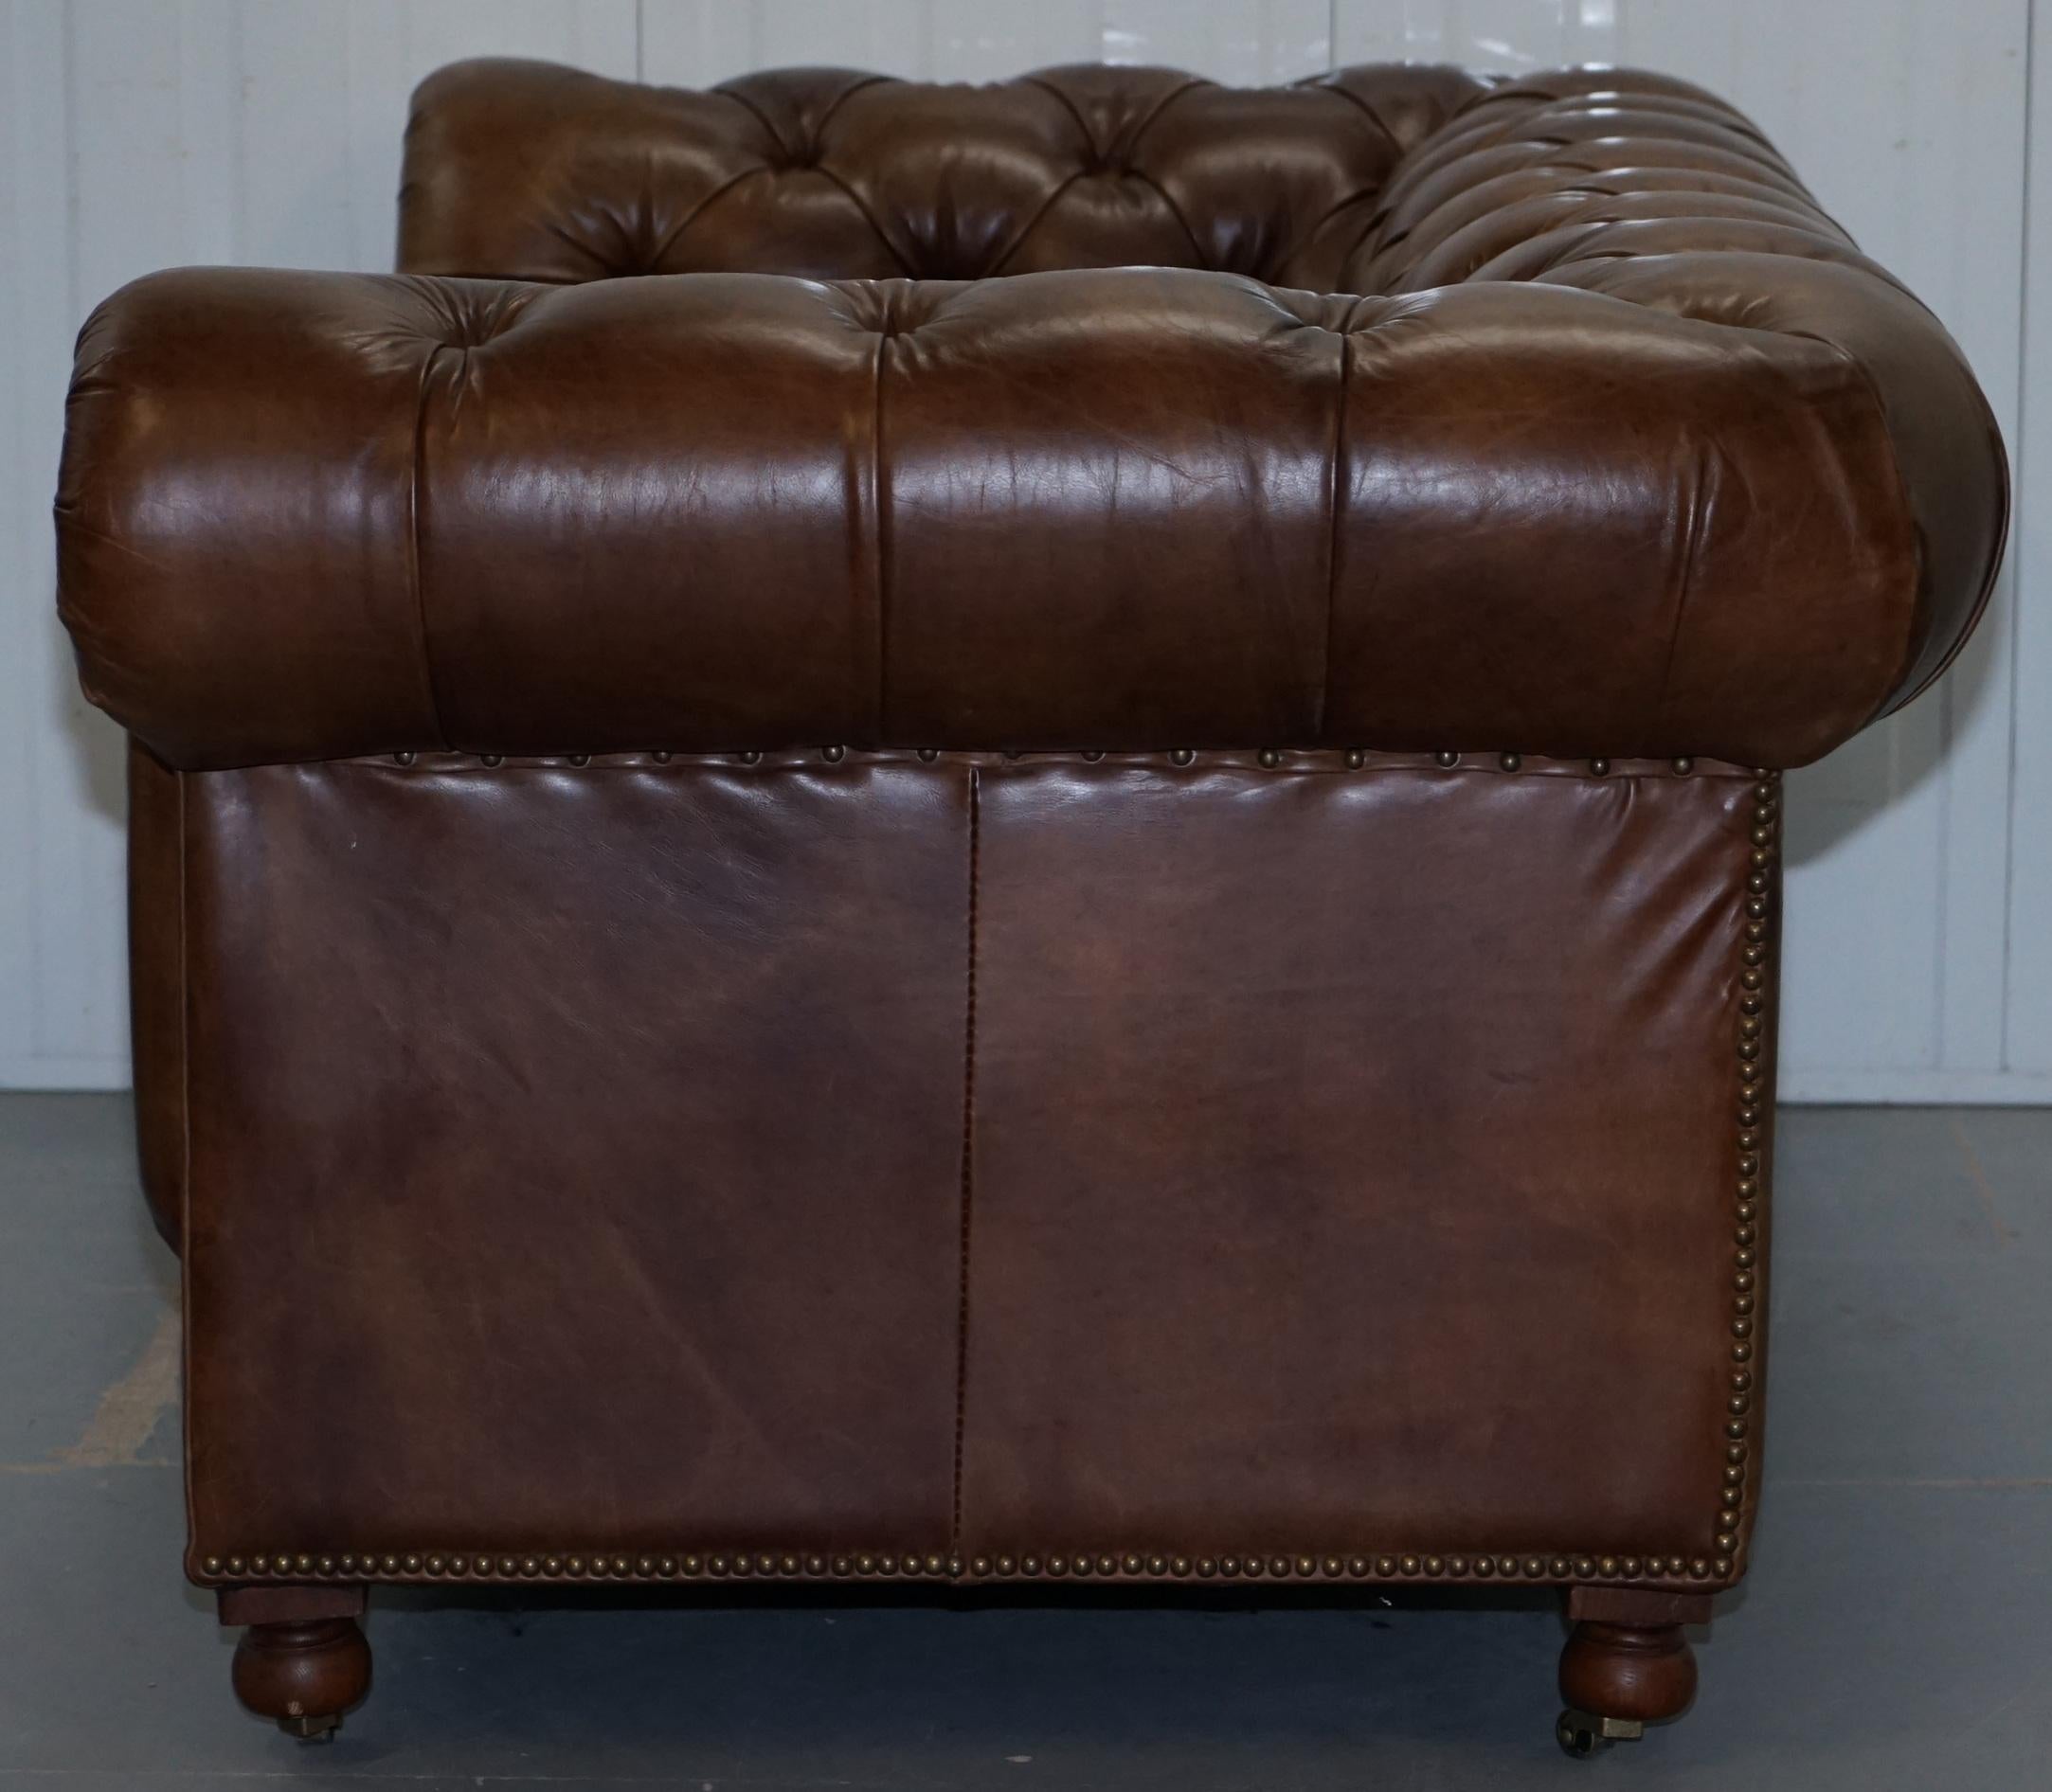 1 of 2 Timothy Oulton Halo Westminster Brown Leather Chesterfield Sofas 11